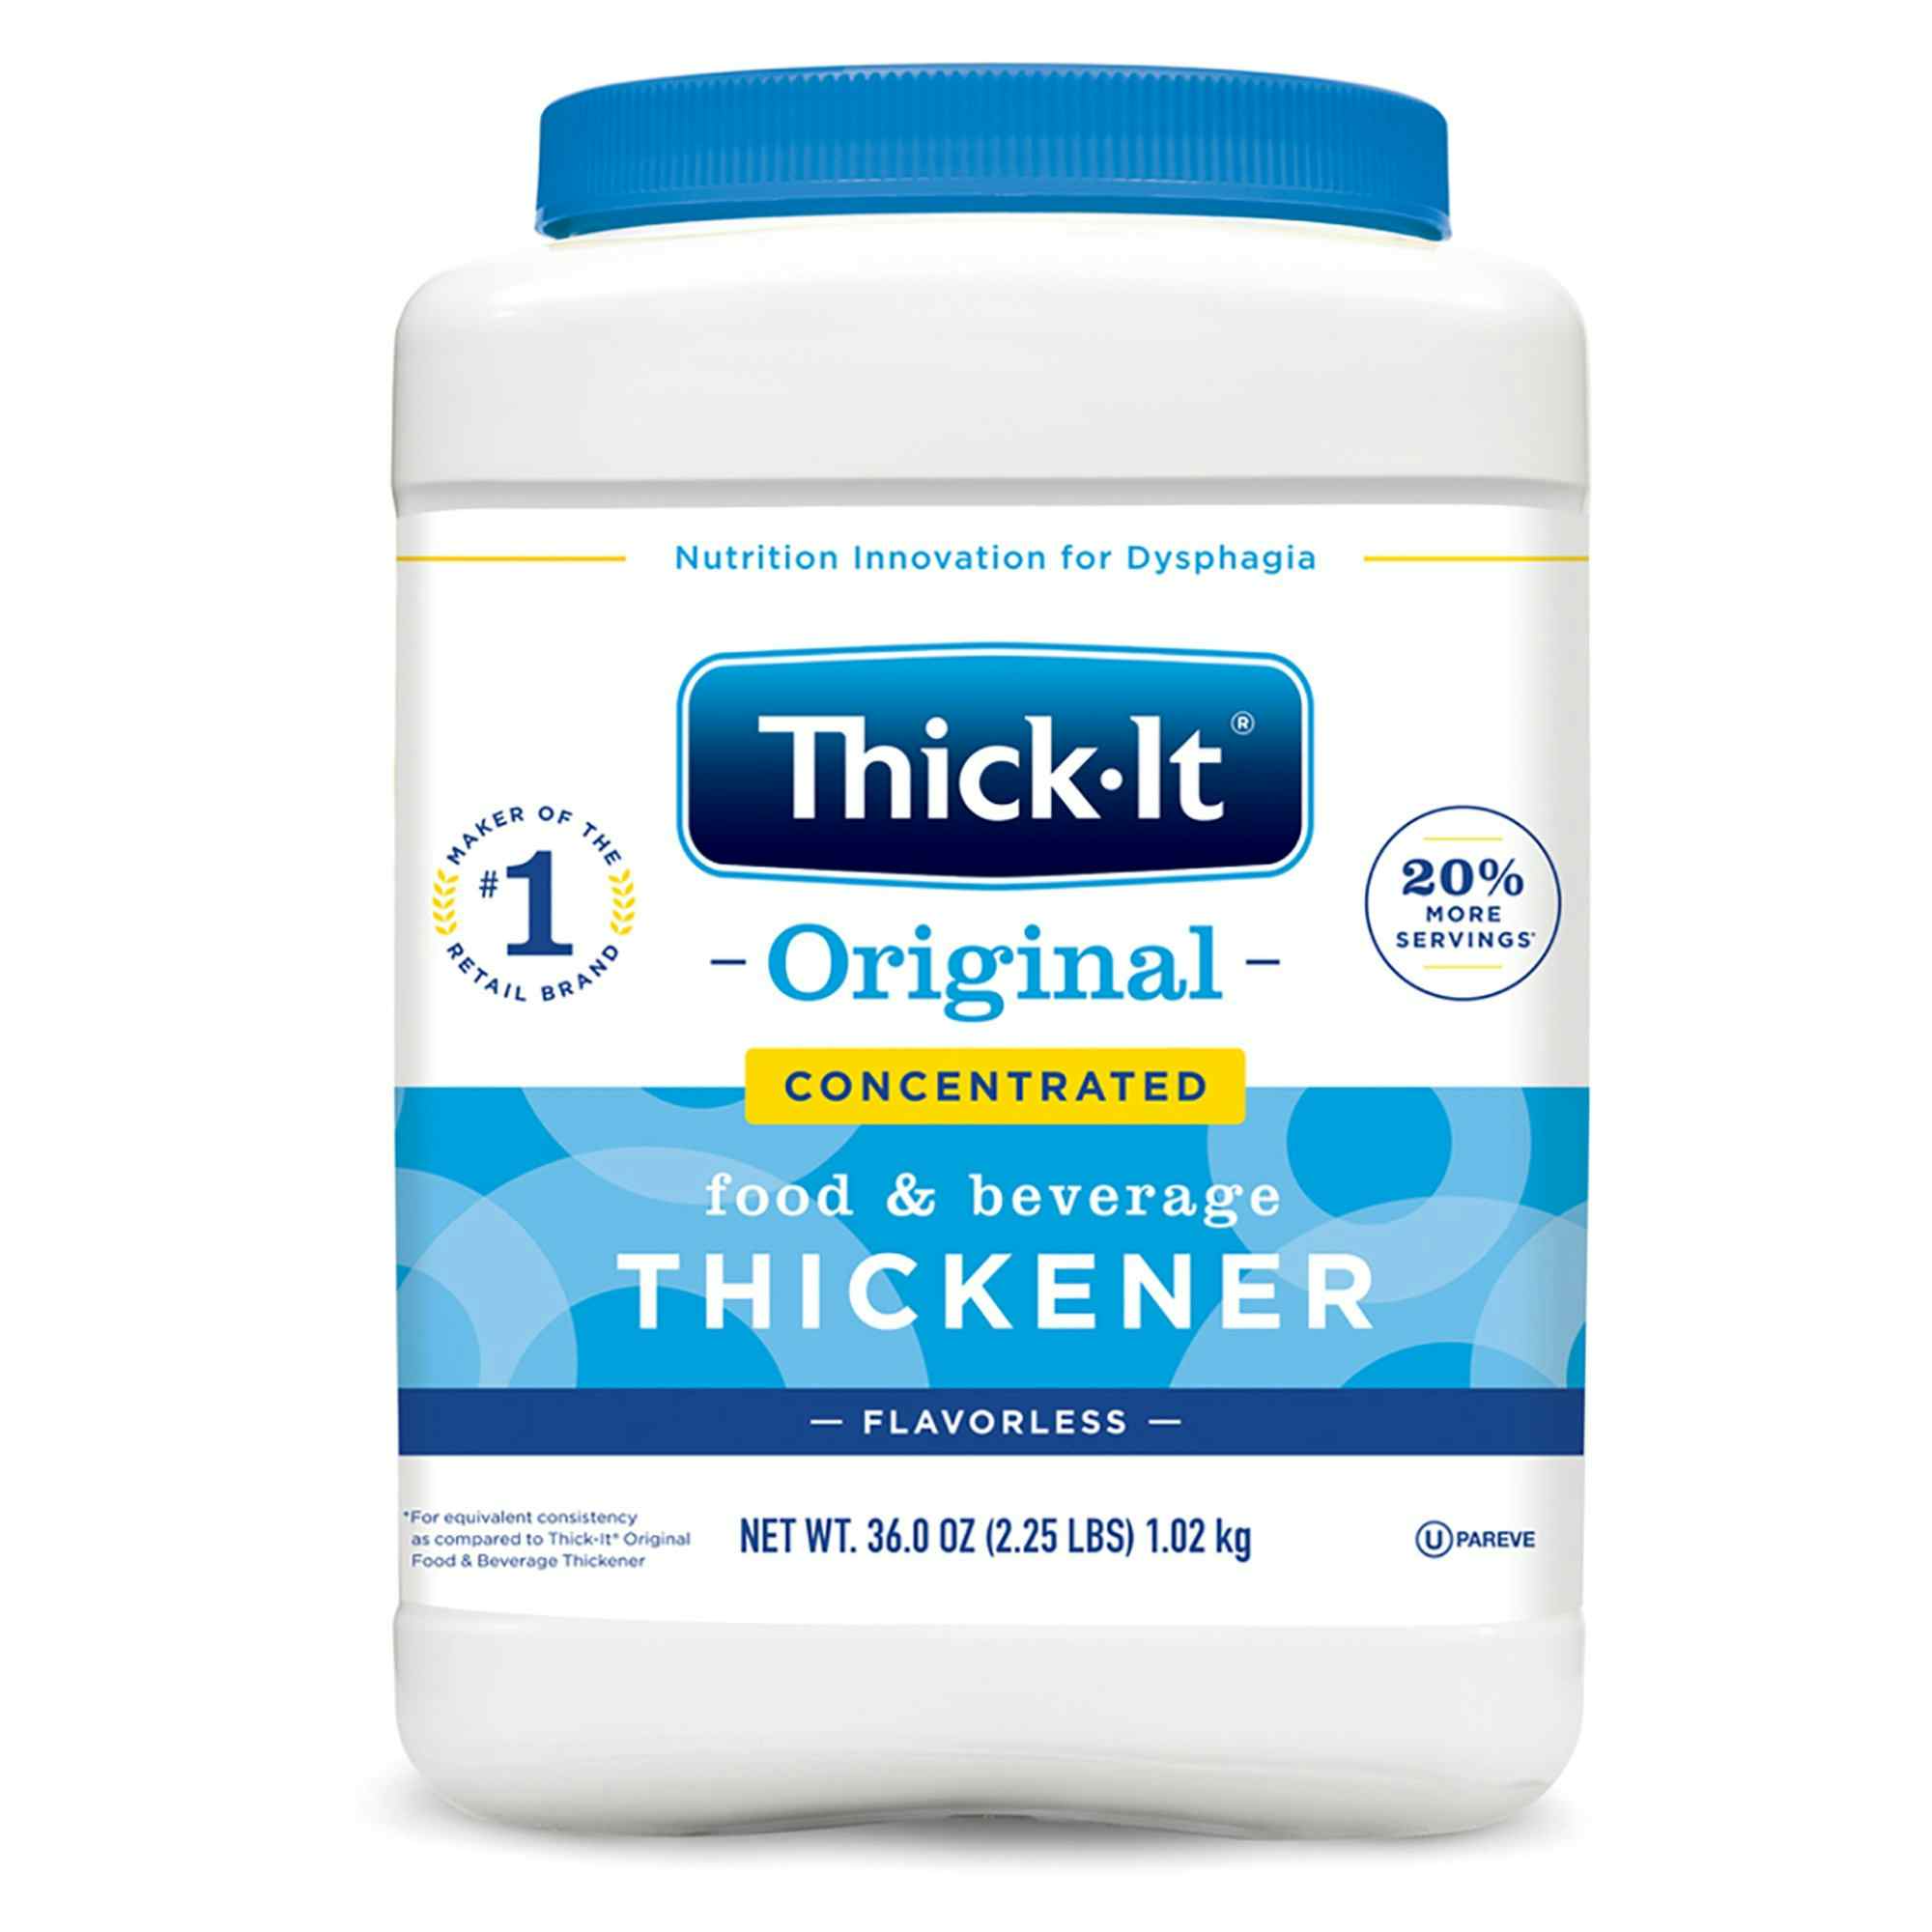 Thick-It Food and Beverage Thickener Original Concentrated, Unflavored Powder, 36 oz., Canister, J587-C6800, 1 Canister